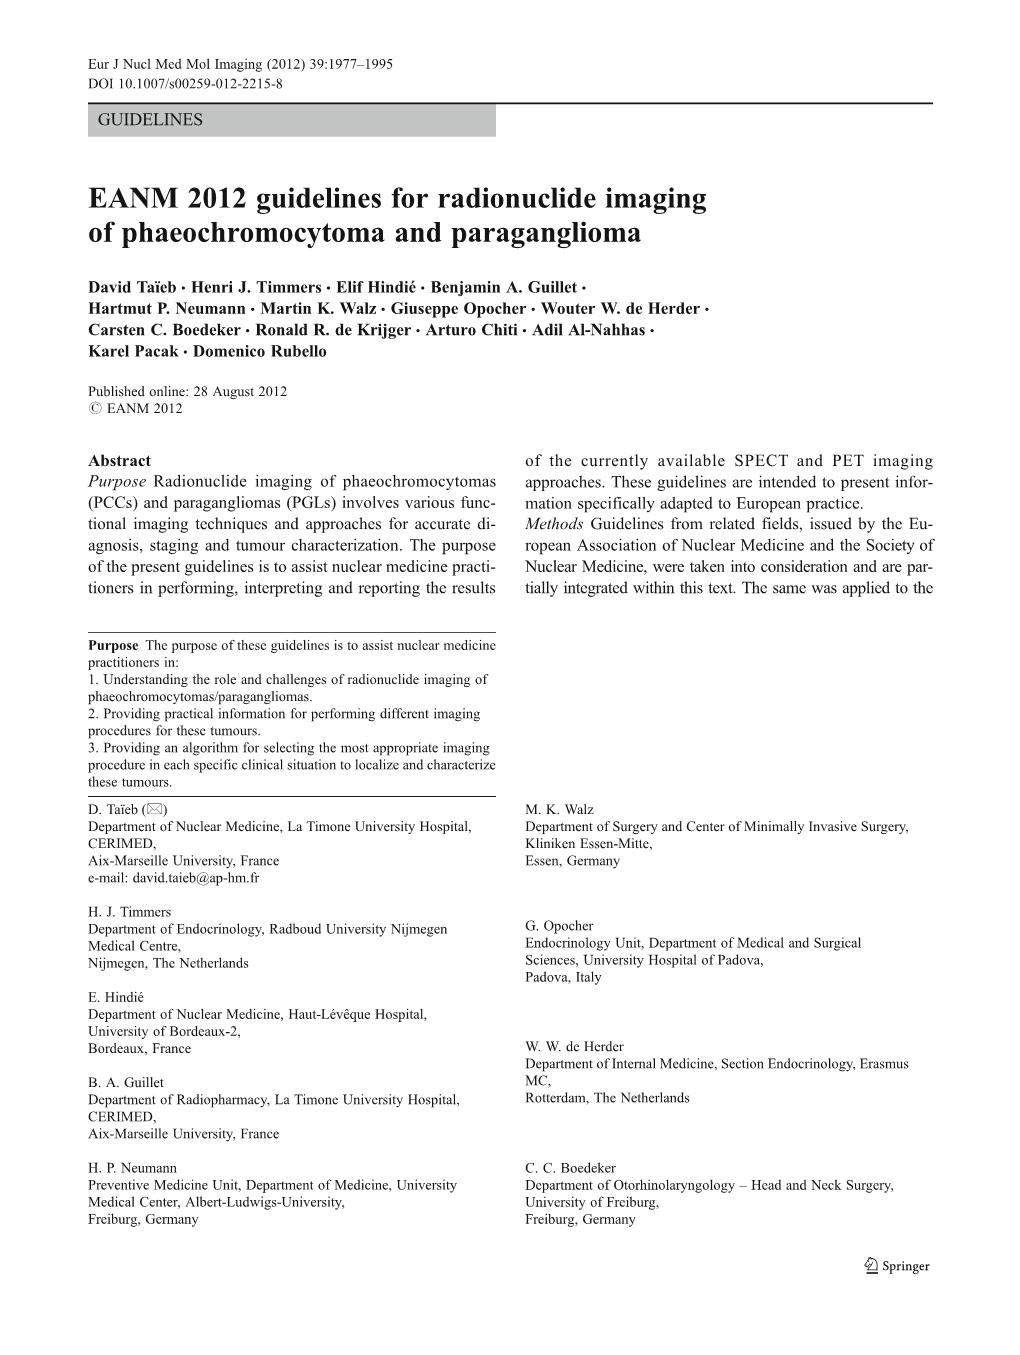 EANM 2012 Guidelines for Radionuclide Imaging of Phaeochromocytoma and Paraganglioma